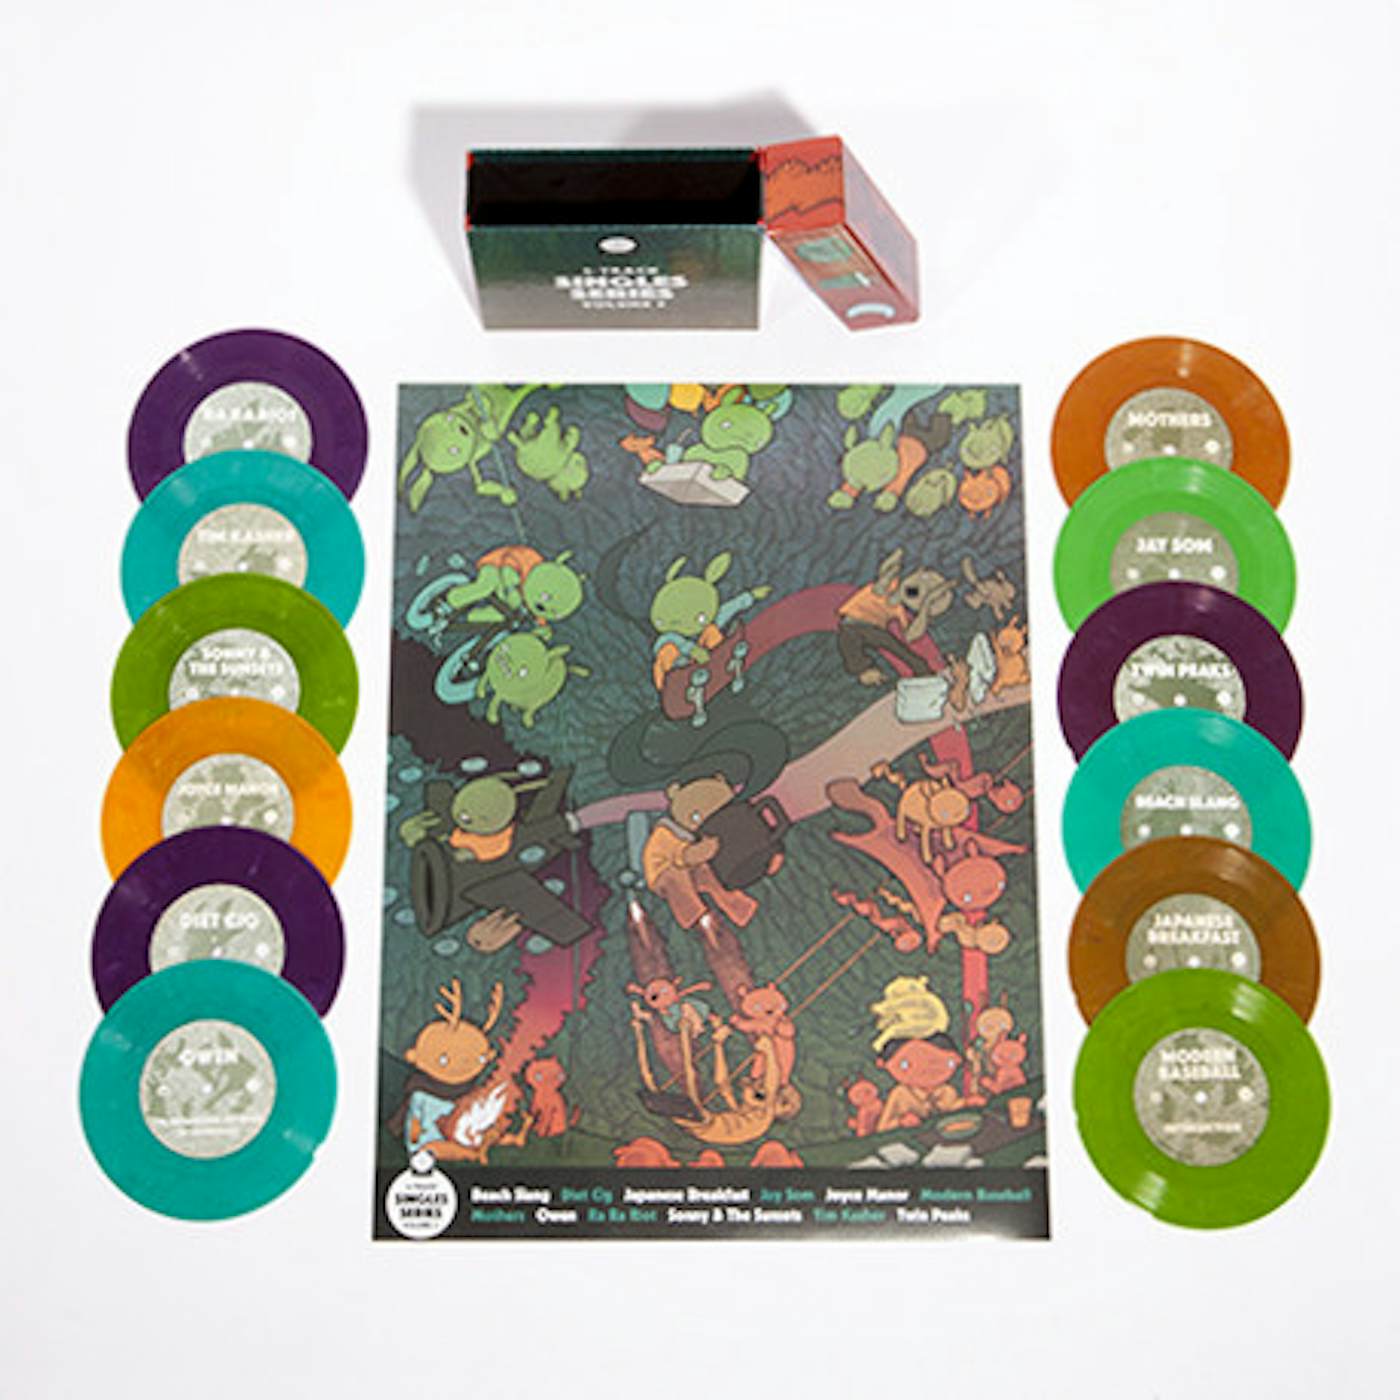 Sonny & The Sunsets Polyvinyl 4-Track Singles Series Vol. 3 COMPLETE BOX SET